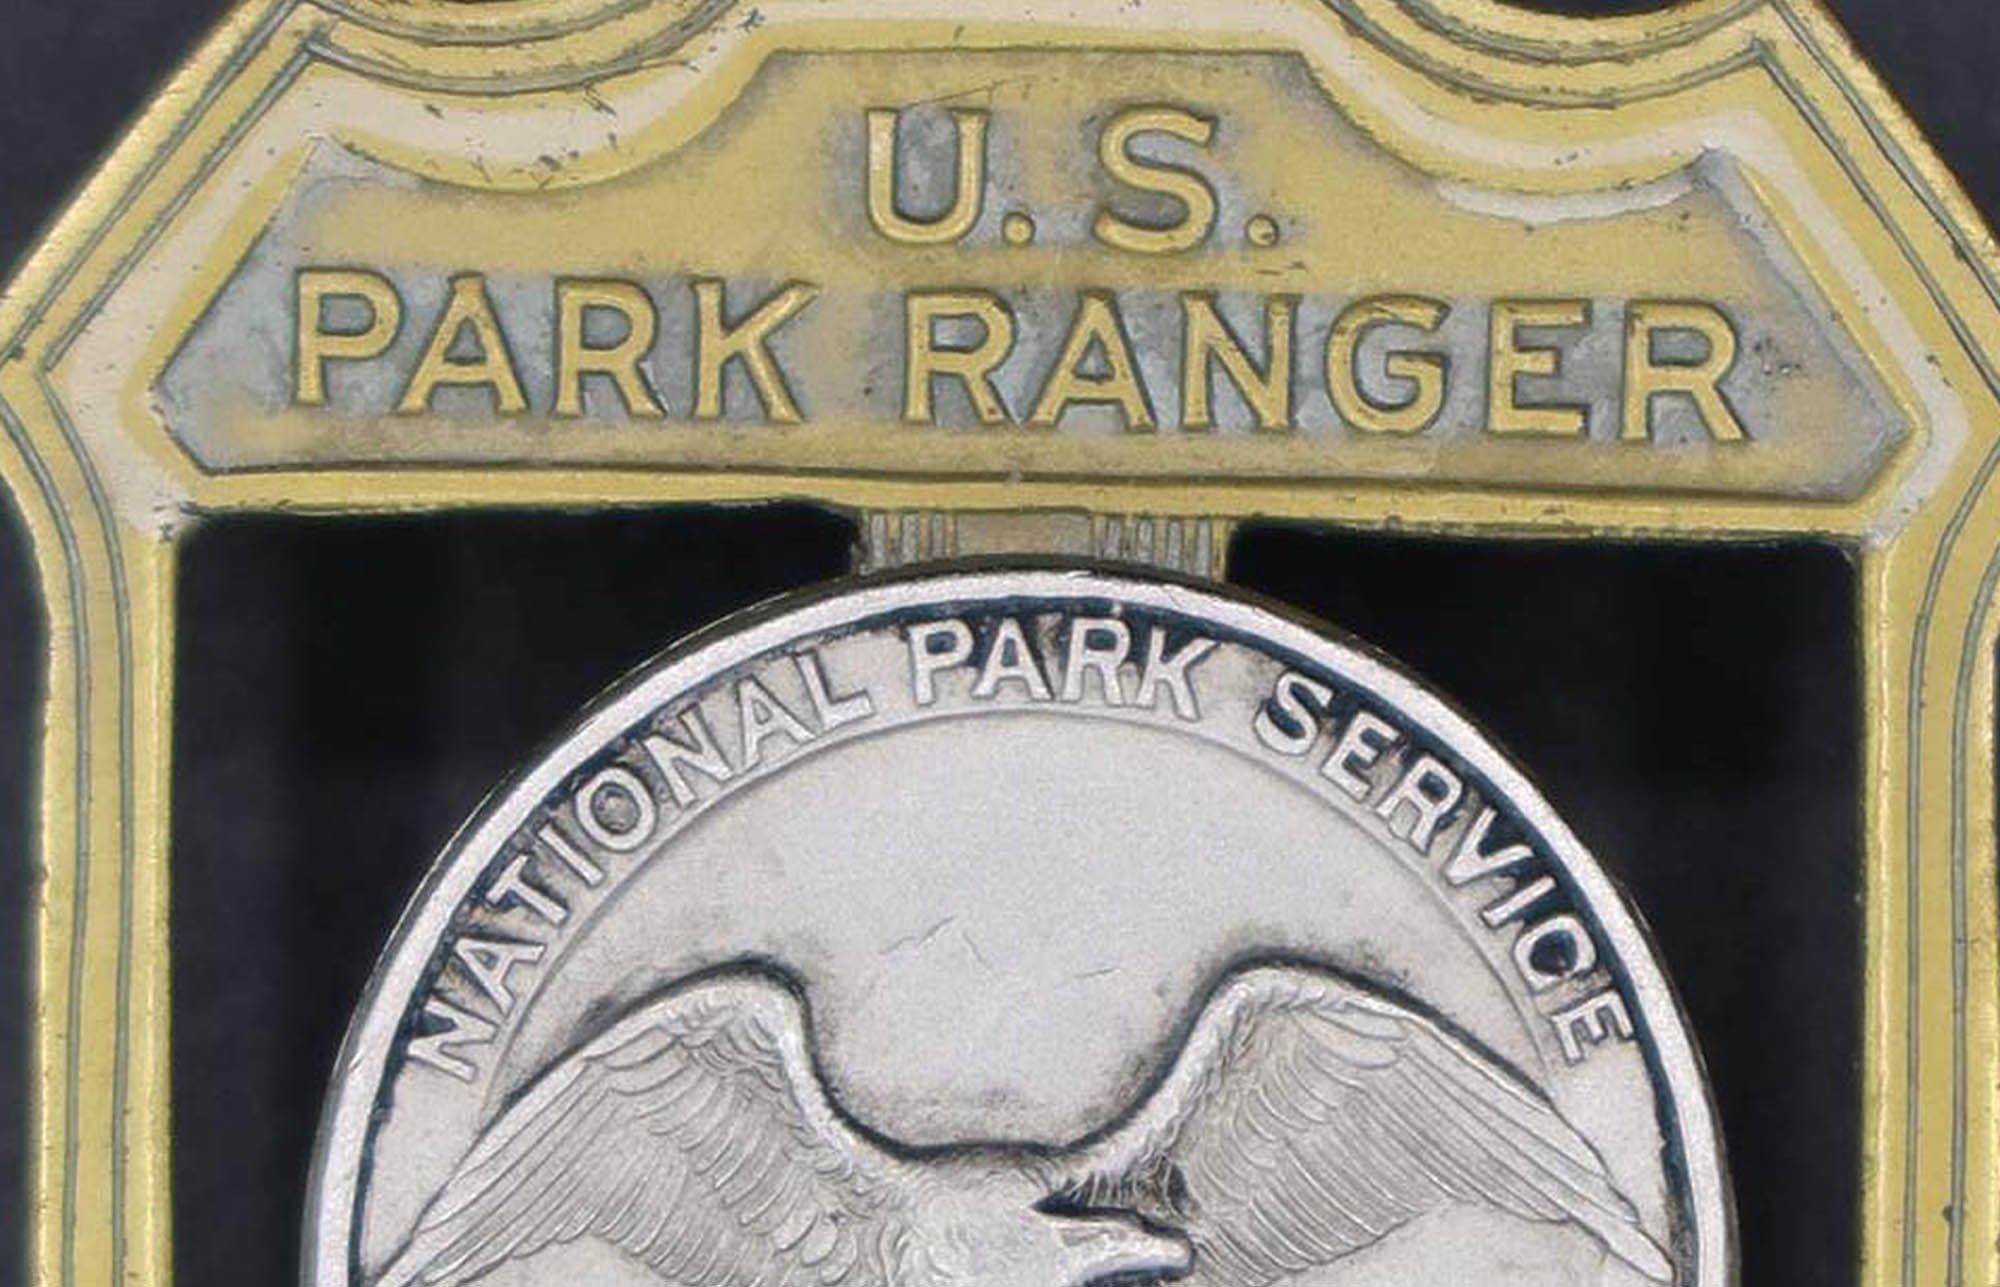 Brass shield-shaped U.S. Park Ranger badge. The raised round seal in the middle has an eagle looking to its left. Area around the center cut out and open.